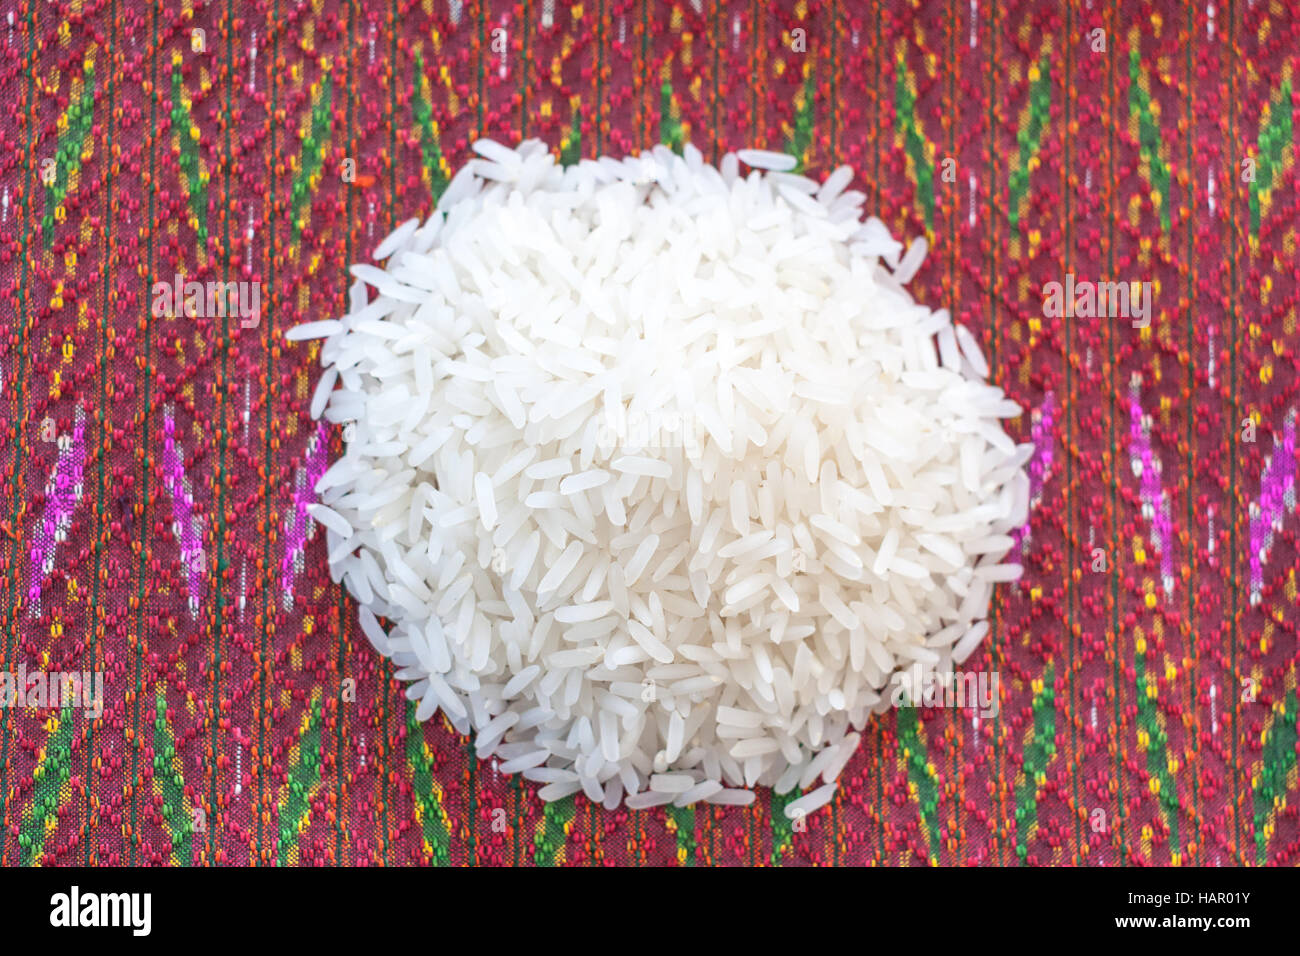 Agriculture Rice Seed Stock Photo